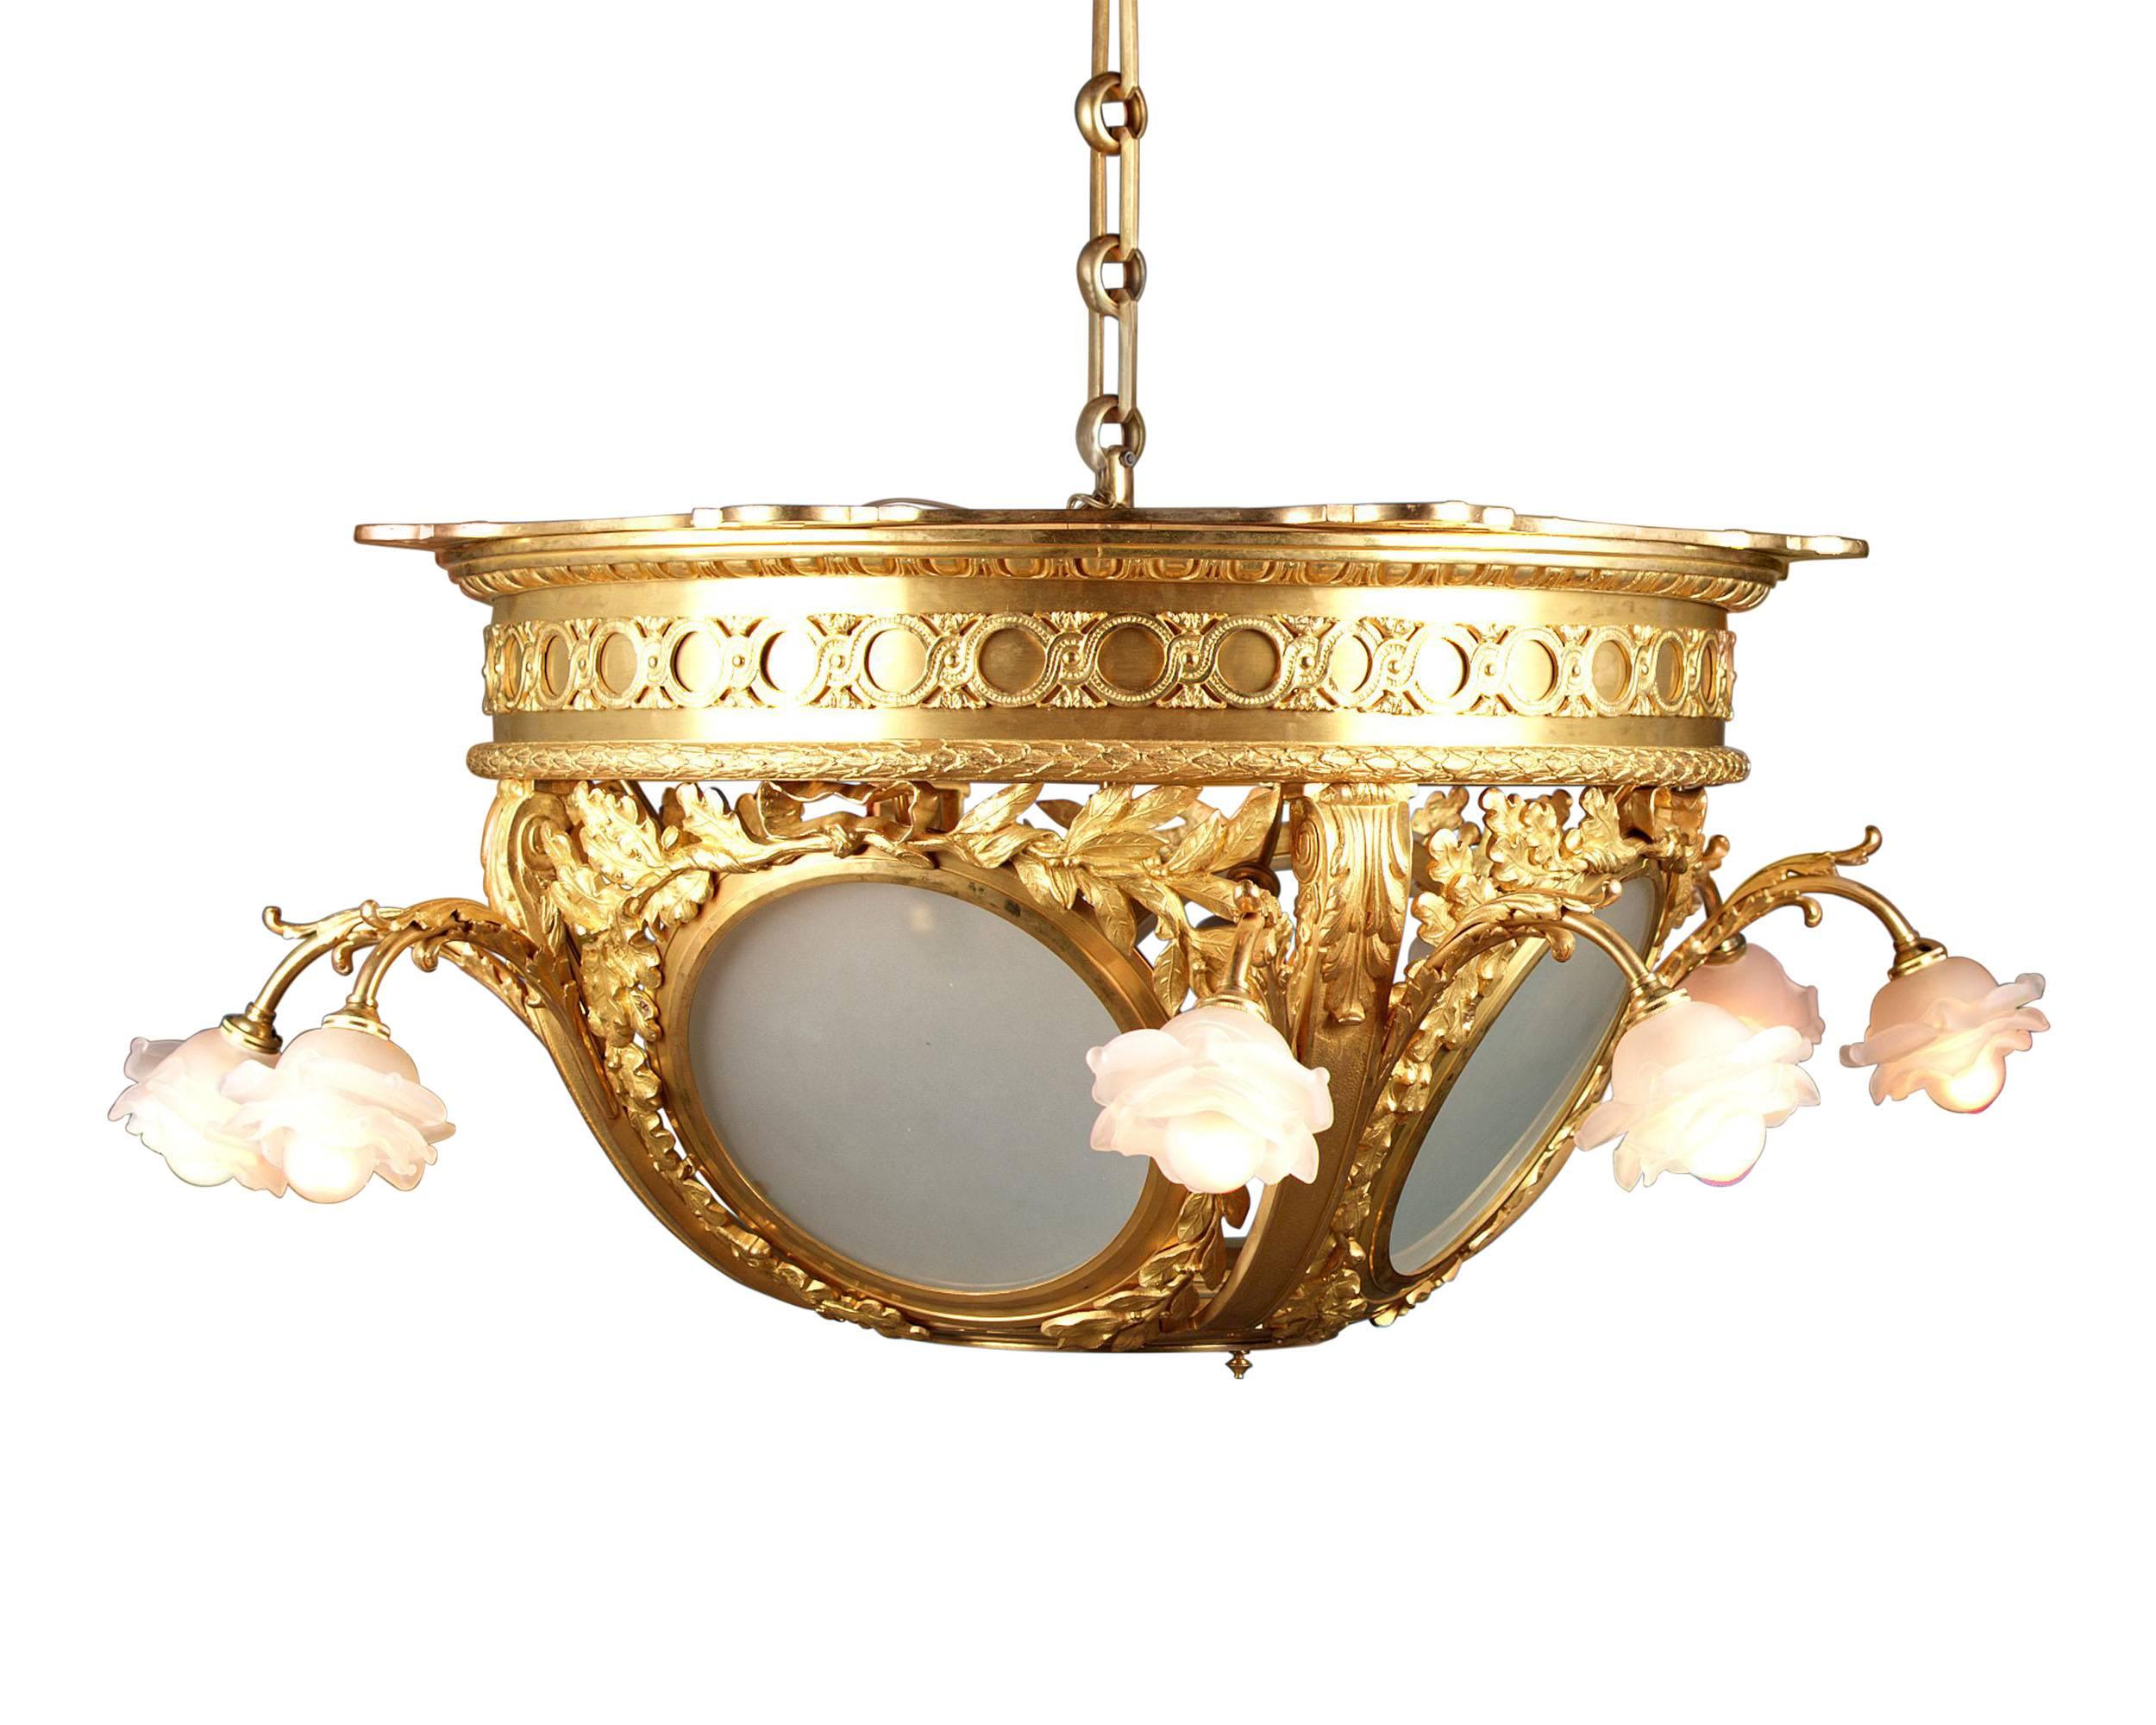 An absolutely stunning French doré bronze chandelier with four double-light frosted glass rosette shades and a central frosted glass dome. Scrolls of acanthus leaves enhance the gilded bronze dome, which lies over the frosted glass. Luxuriously